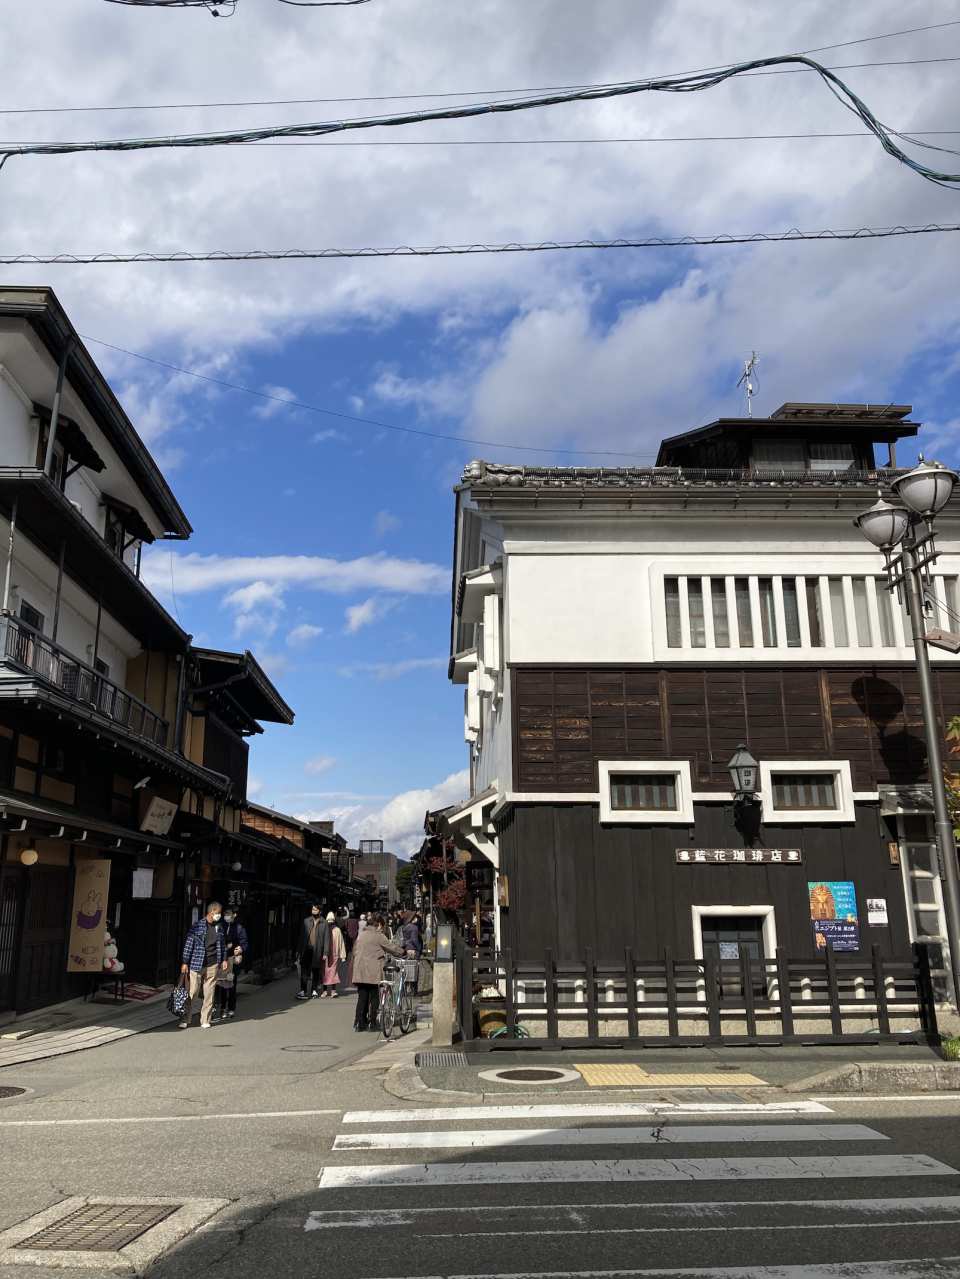 Takayama Old Town (stay for about 2 hours)